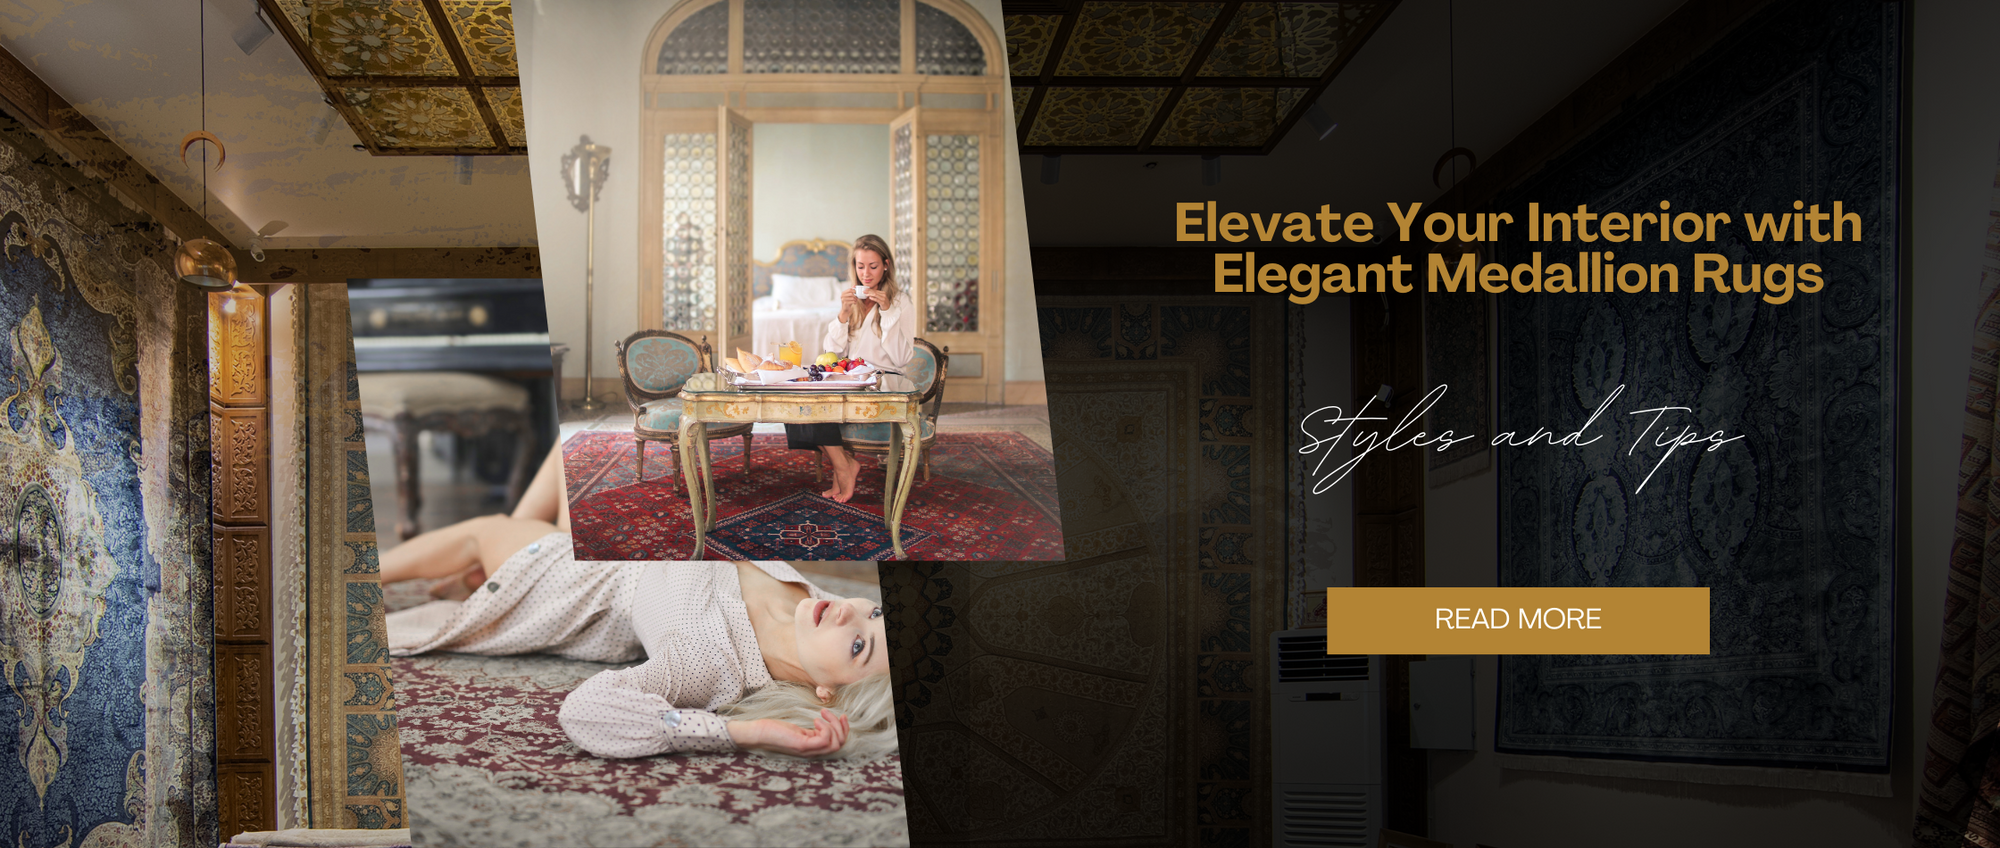 Elevate Your Interior with Elegant Medallion Rugs: Styles and Tips